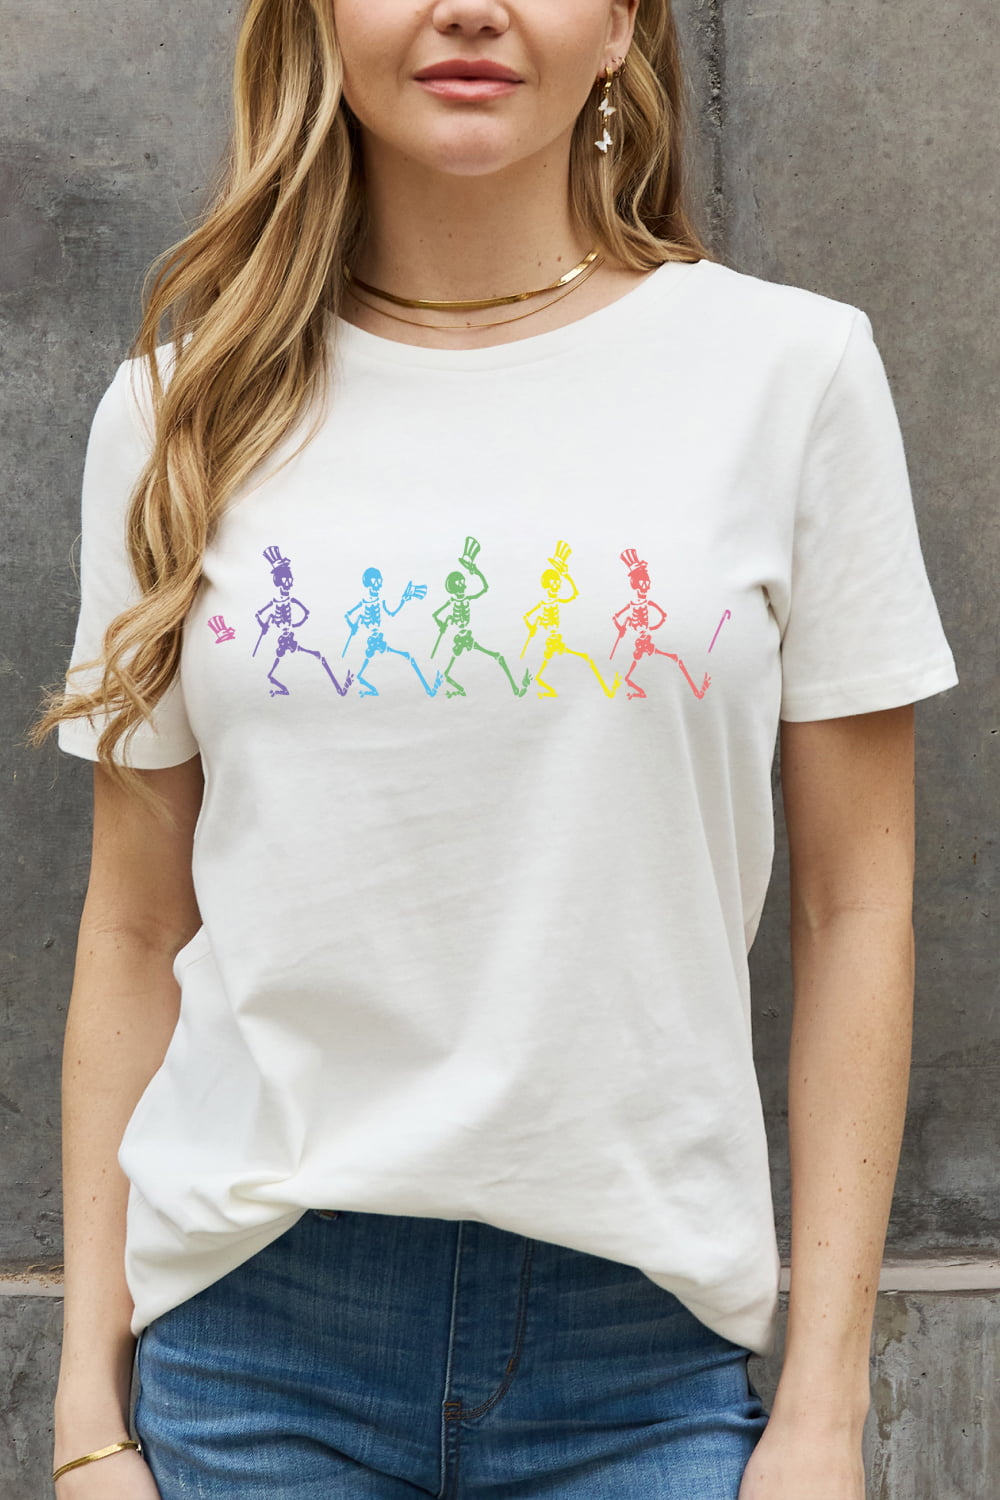 Full Size Dancing Skeleton Graphic Cotton Tee - T-Shirts - Shirts & Tops - 10 - 2024